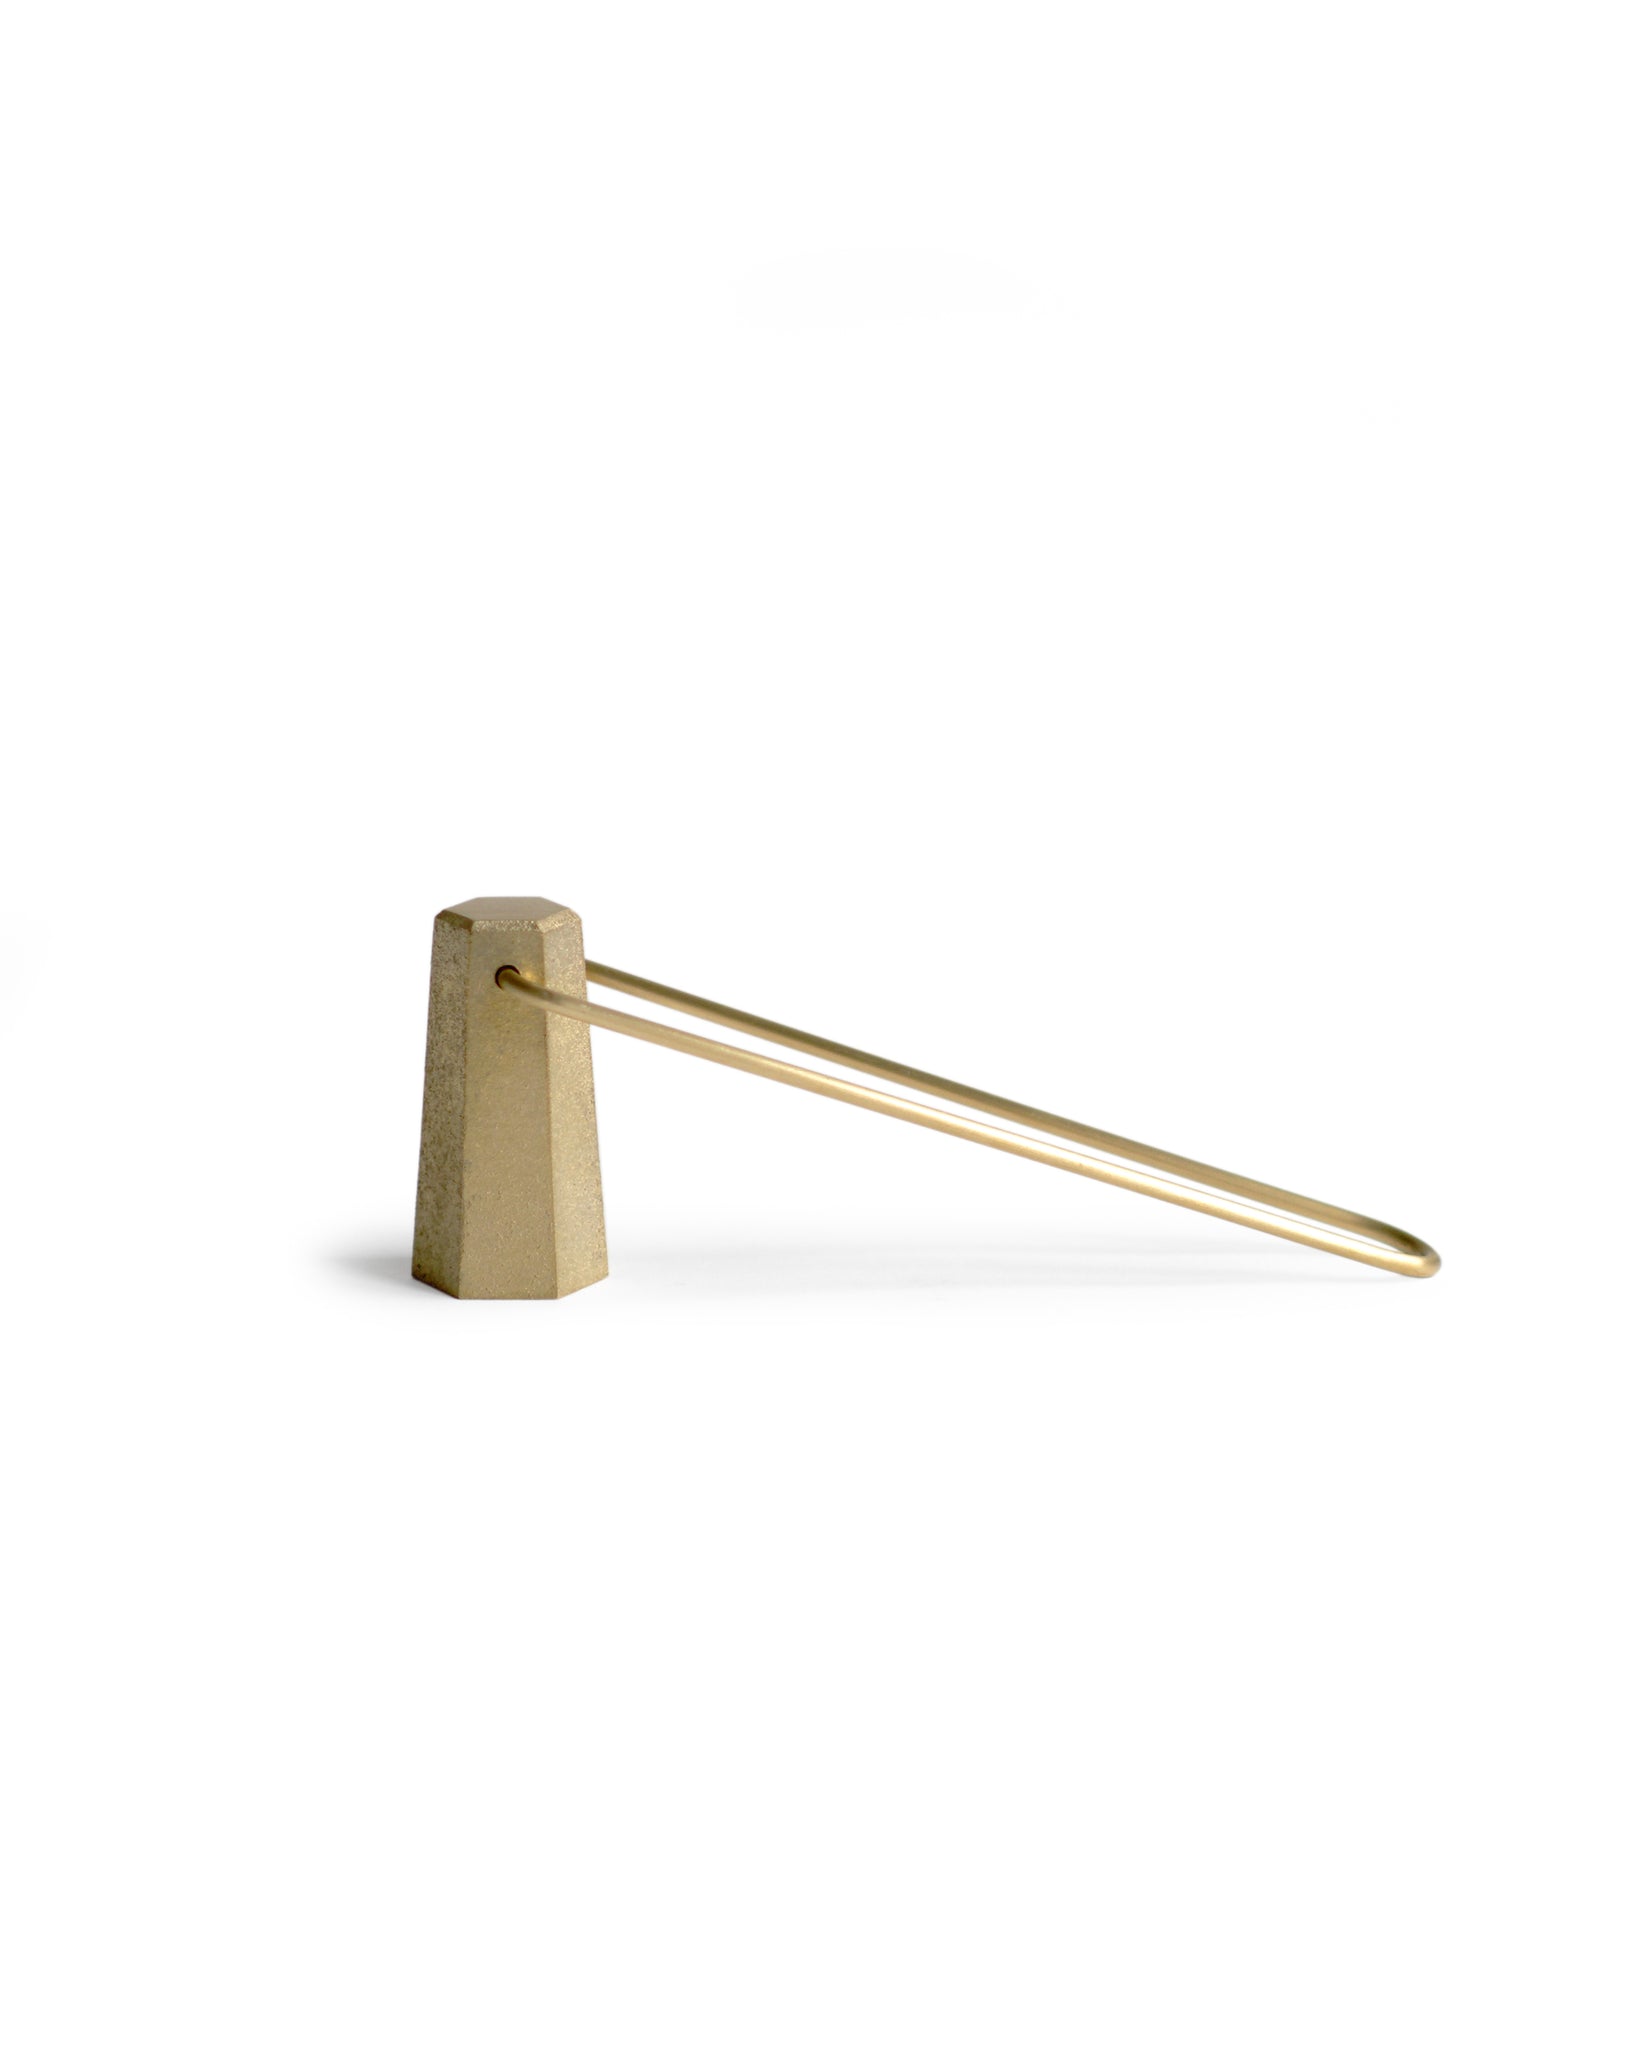 Silhouetted brass candle snuffer against white background.